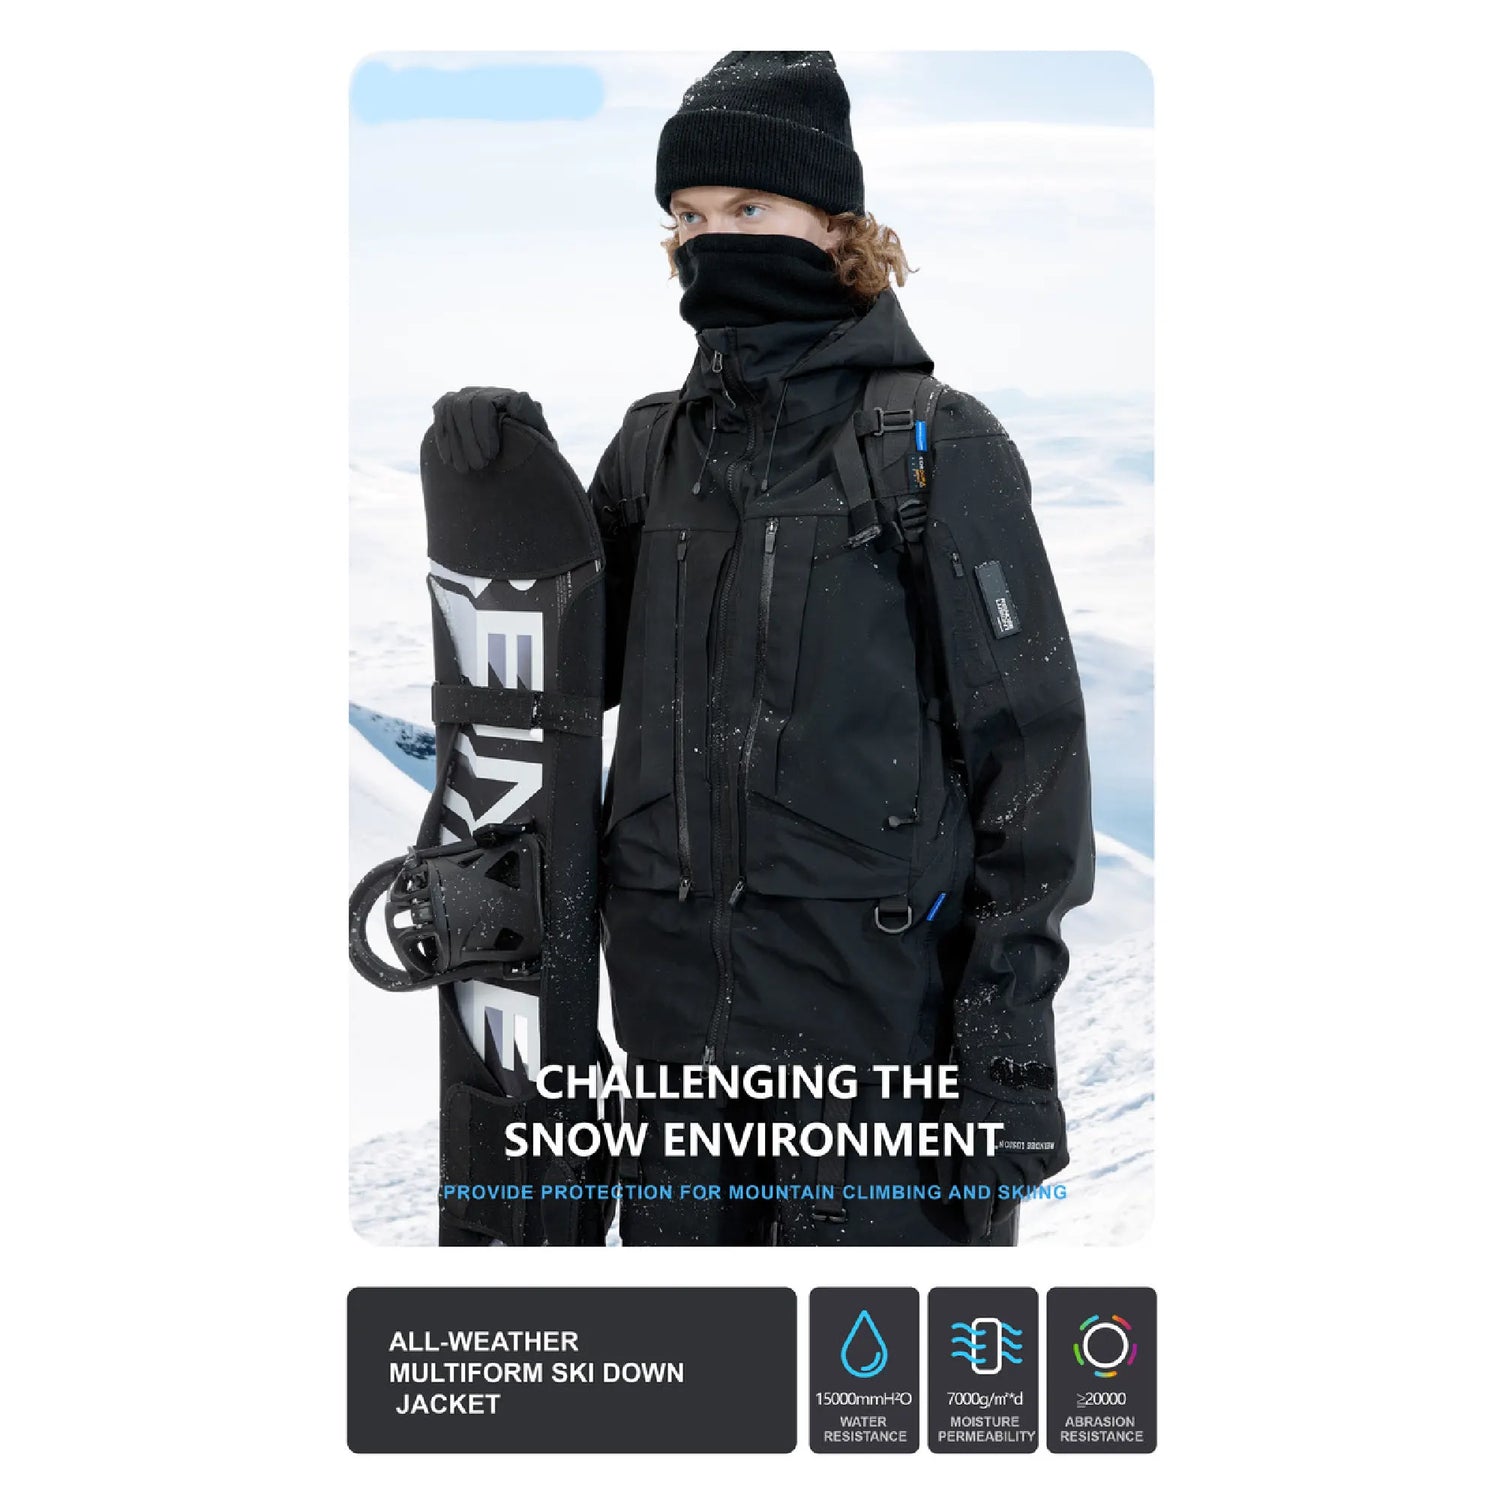 The 0107 Ski Down Techwear is challenging the snow environment